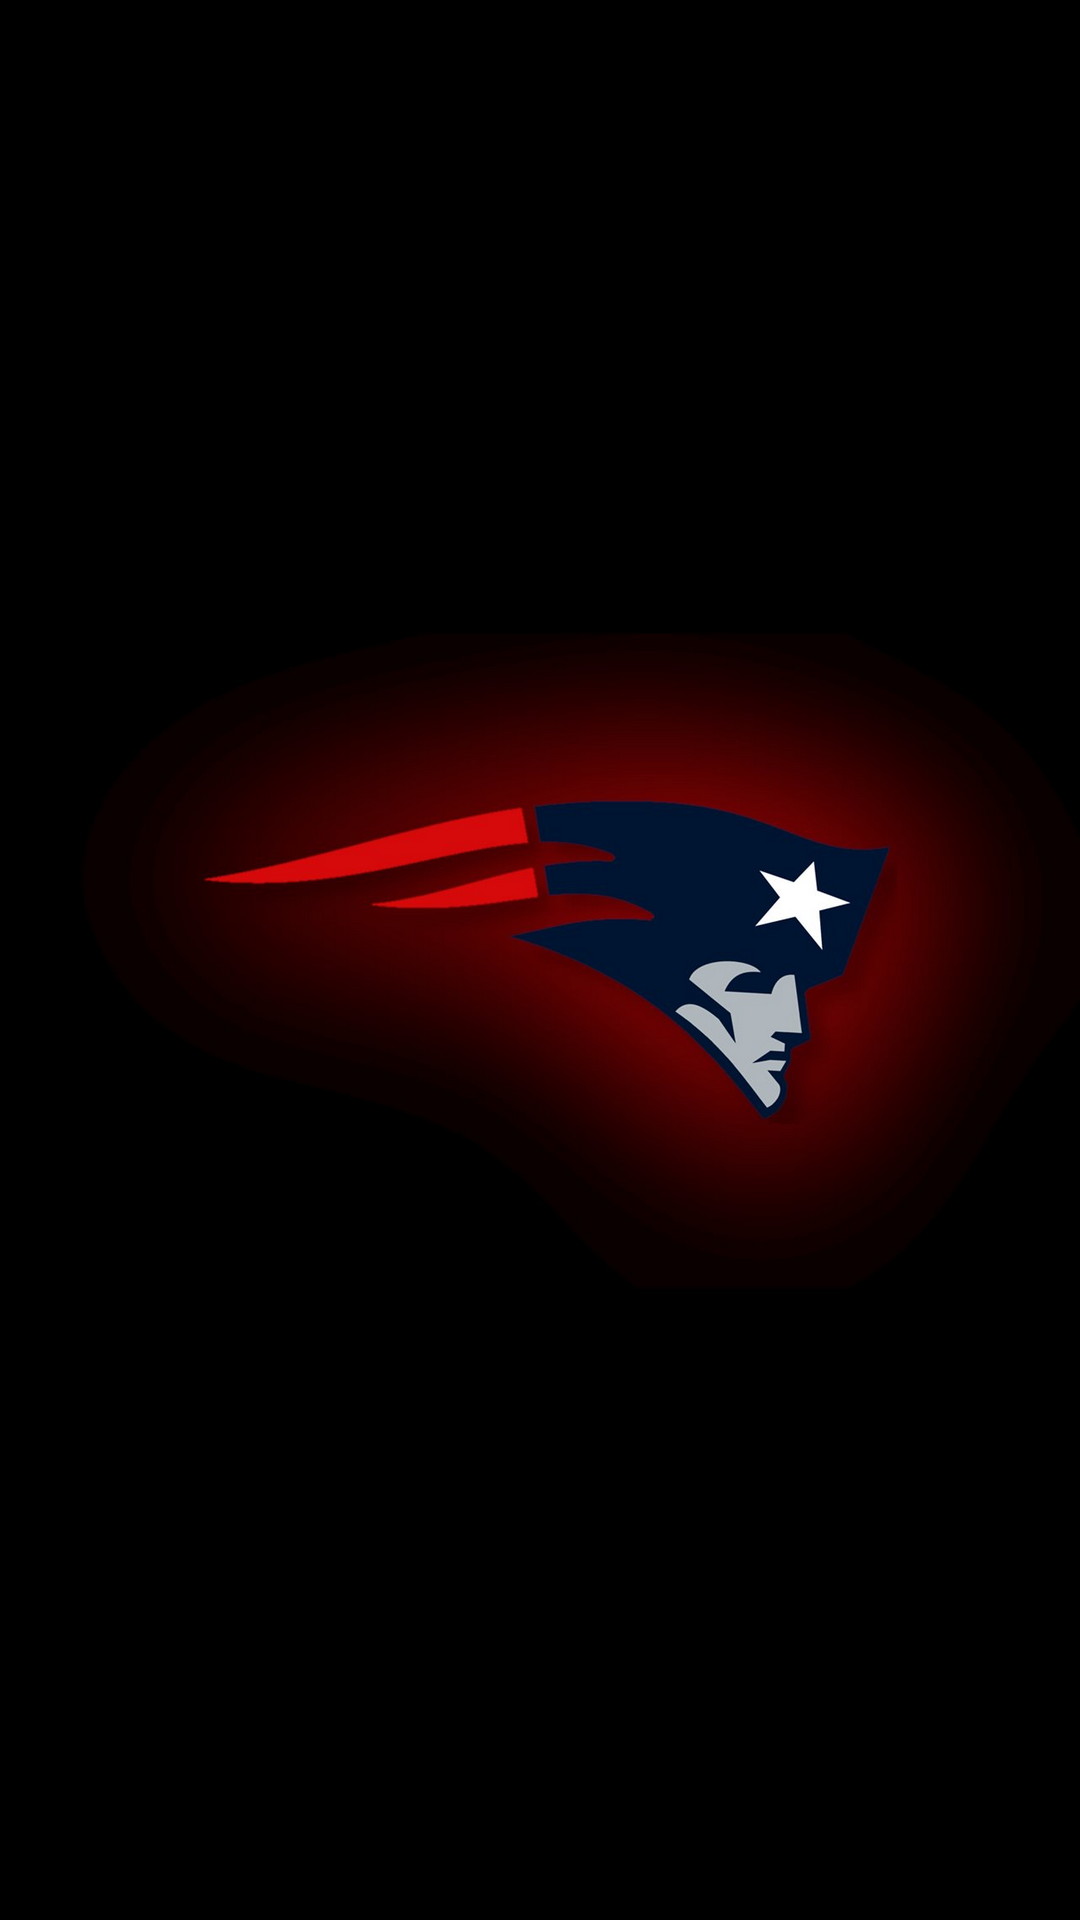 Patriots NFL Android Wallpaper with high-resolution 1080x1920 pixel. You can use and set as wallpaper for Notebook Screensavers, Mac Wallpapers, Mobile Home Screen, iPhone or Android Phones Lock Screen